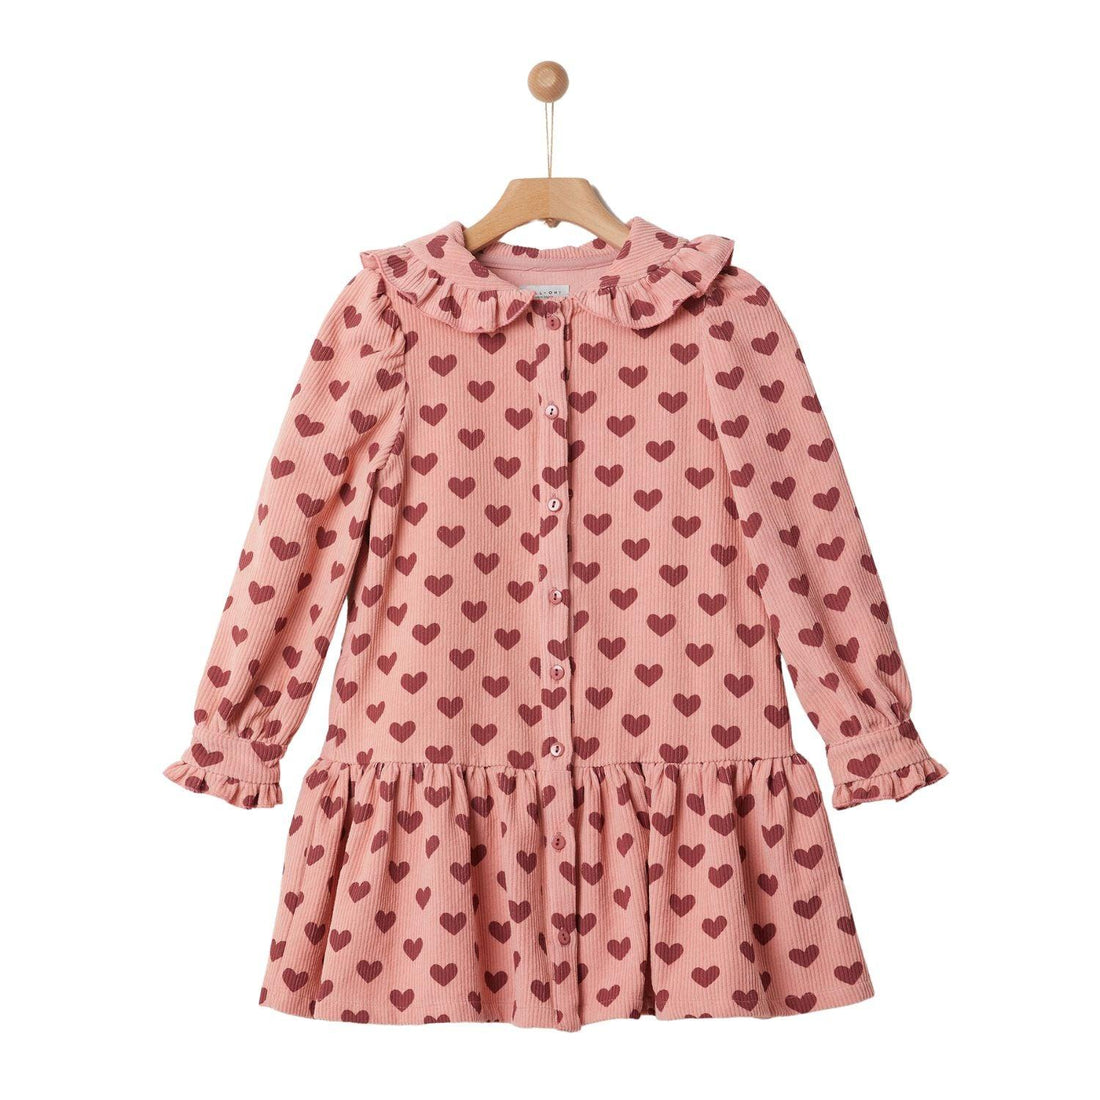  Pink Hearts All Over Shirt Collar Cordurory Dress - My Little Thieves